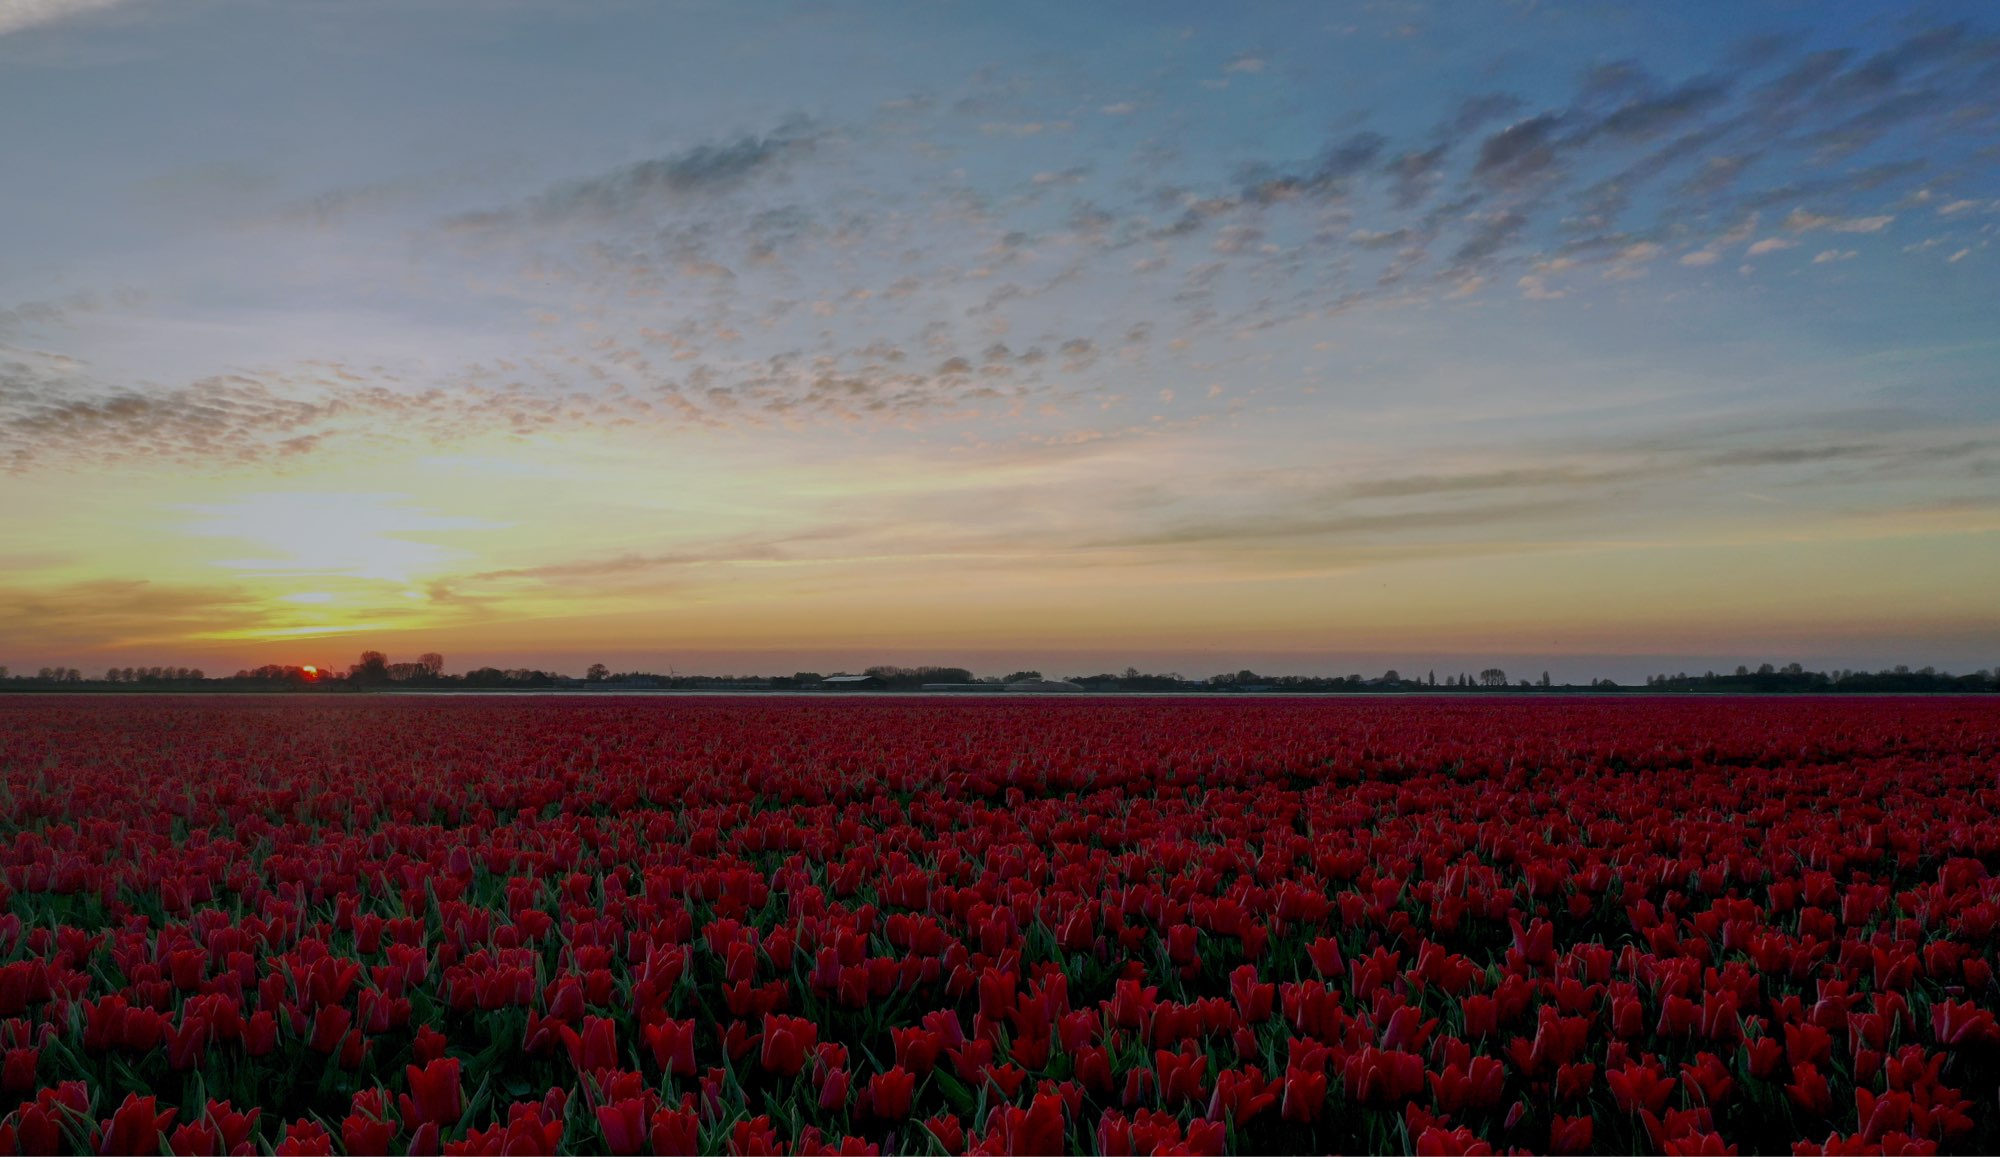 Horticulture field of red tulips treated with Maxstim Ornamental biostimulant